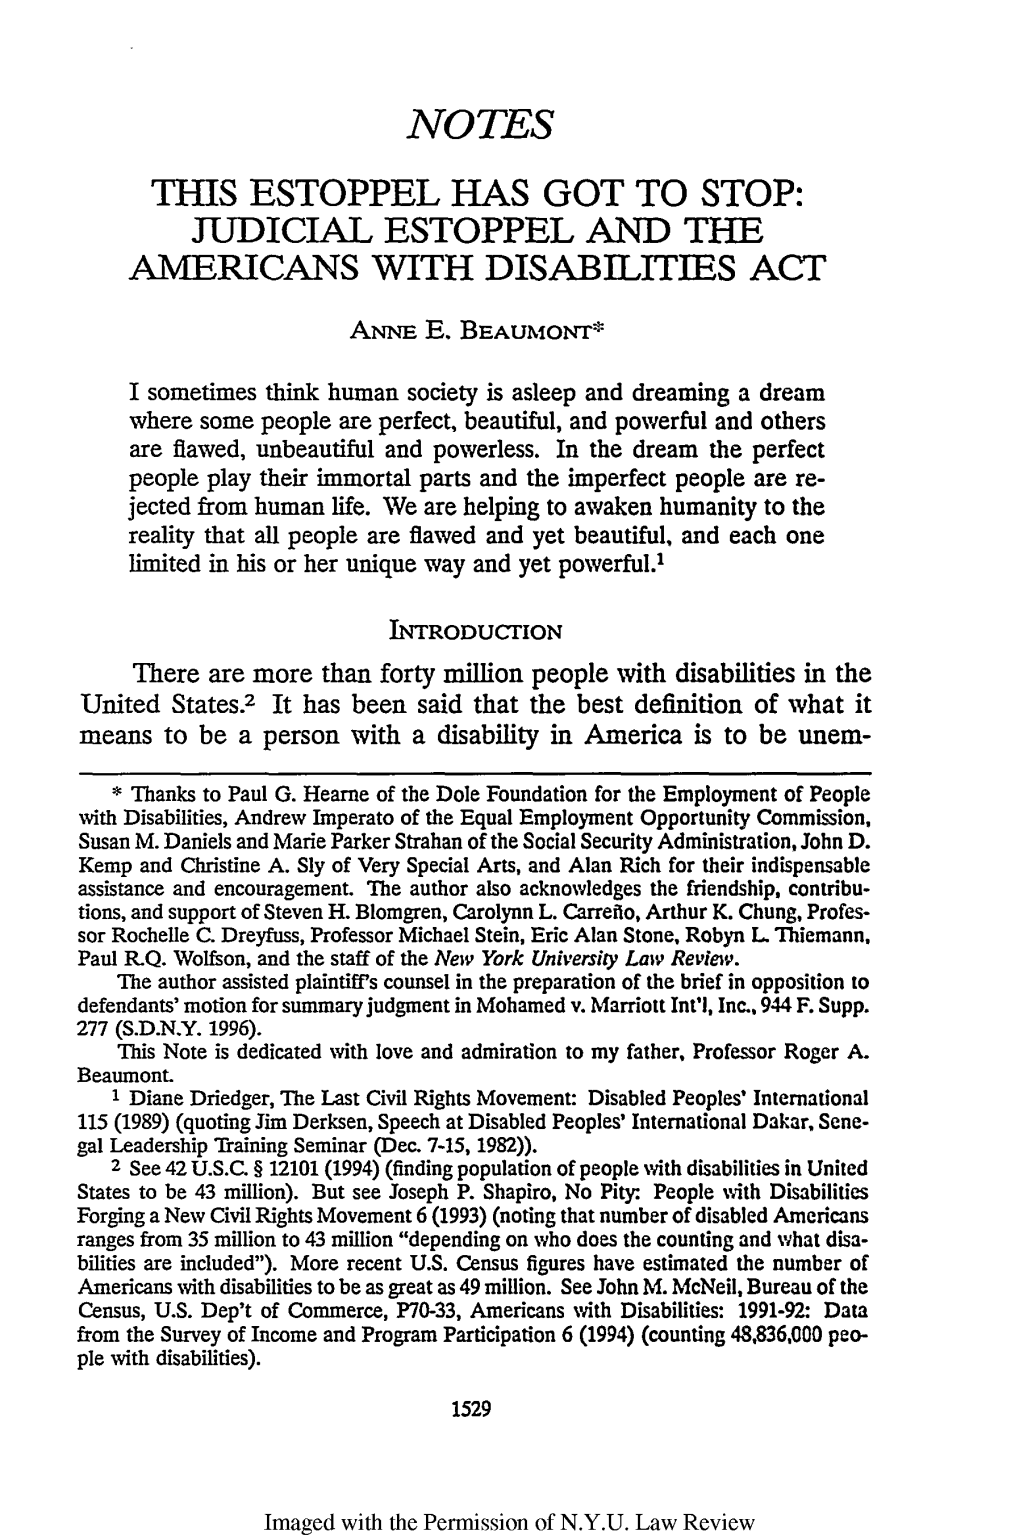 Judicial Estoppel and the Americans with Disabilities Act